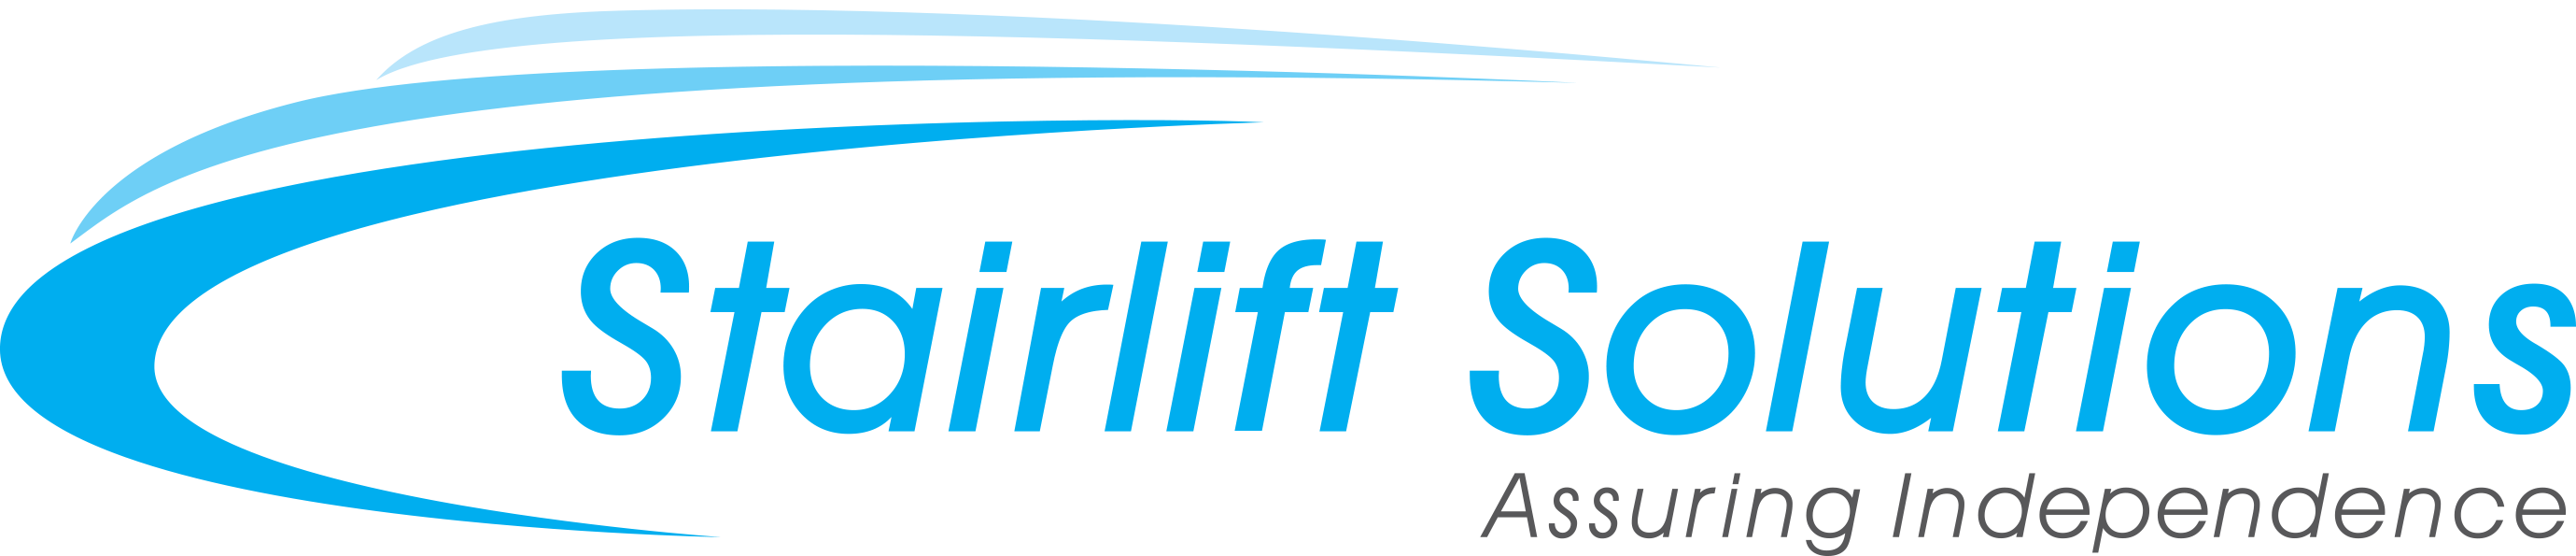 Stairlift Solutions Logo